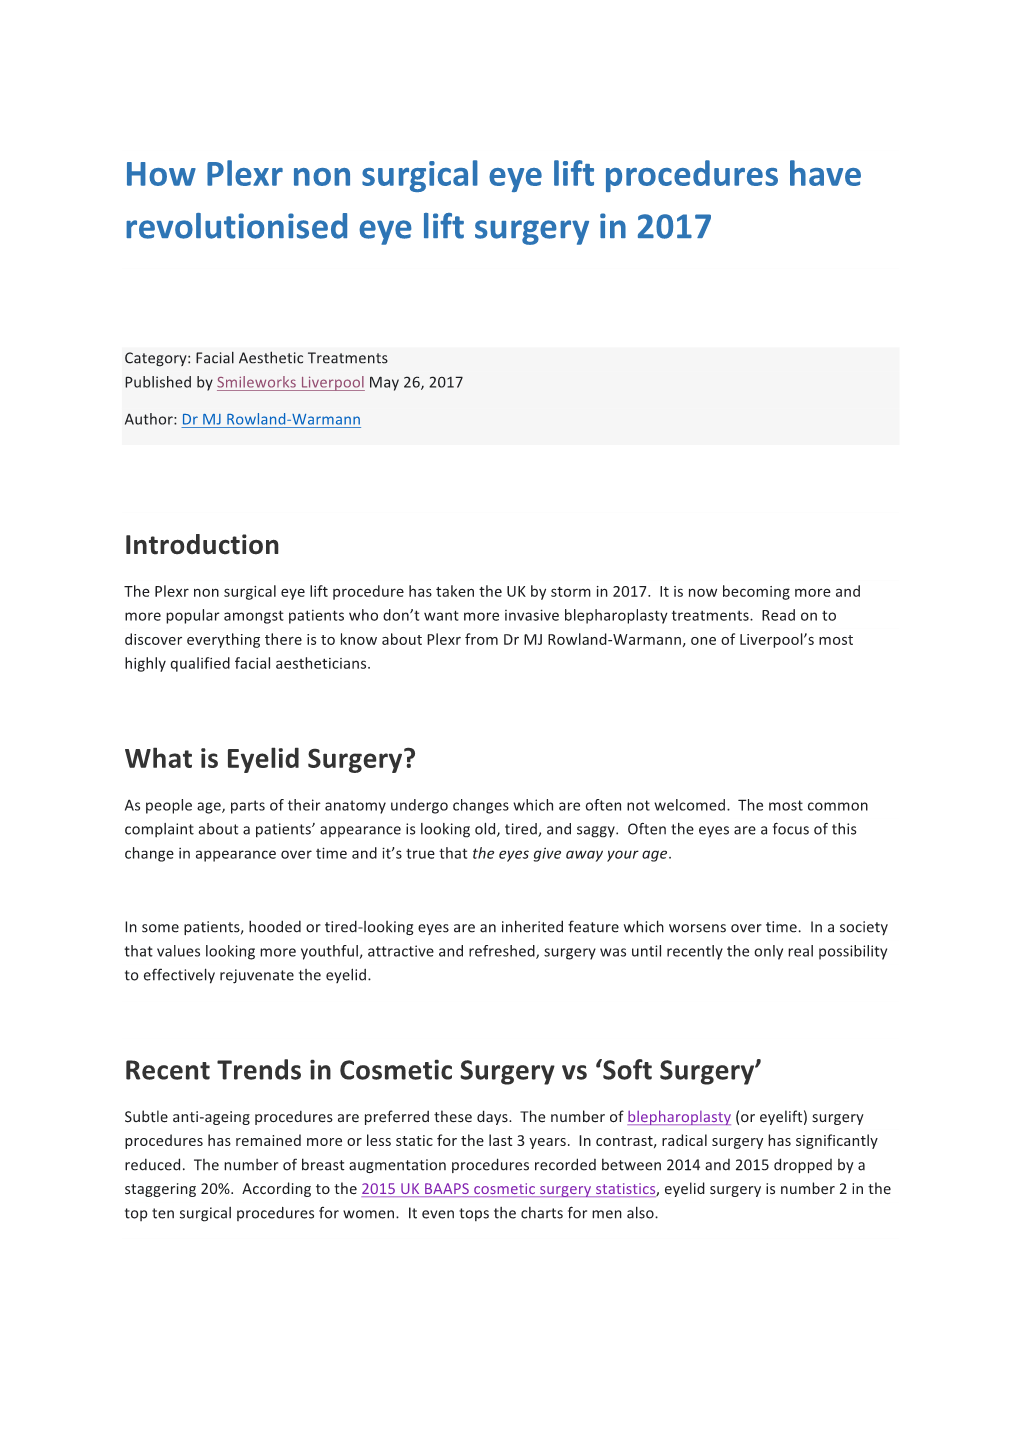 How Plexr Non Surgical Eye Lift Procedures Have Revolutionised Eye Lift Surgery in 2017